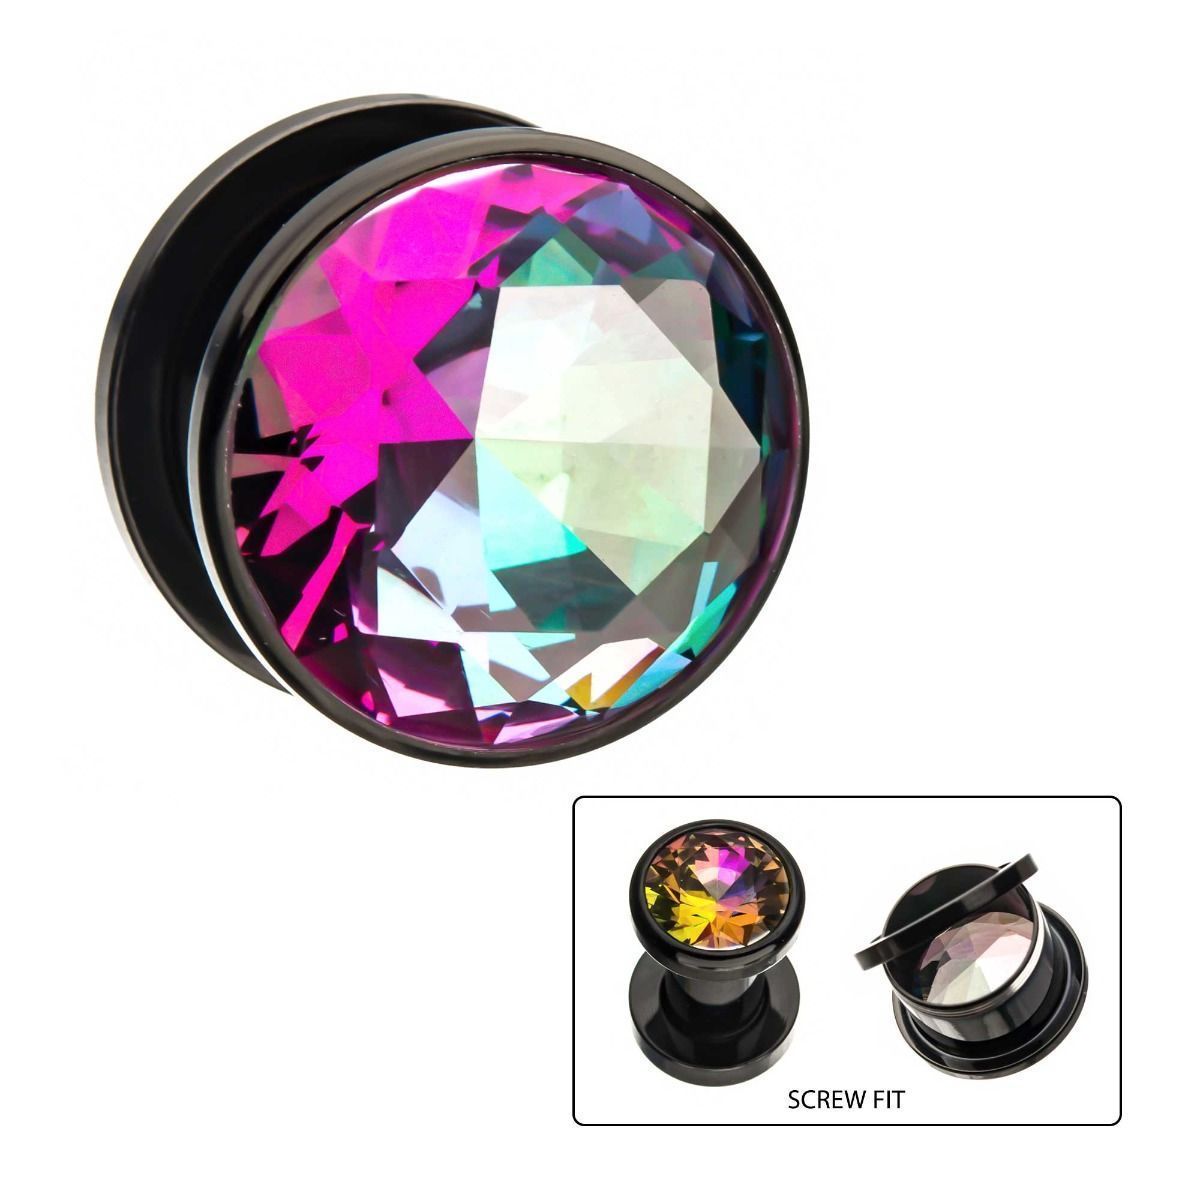 Plugs Earrings - Double Flare Purple and Green CZ Black Plated Screw Fit Plugs - 1 Pair sbvps2836kag -Rebel Bod-RebelBod